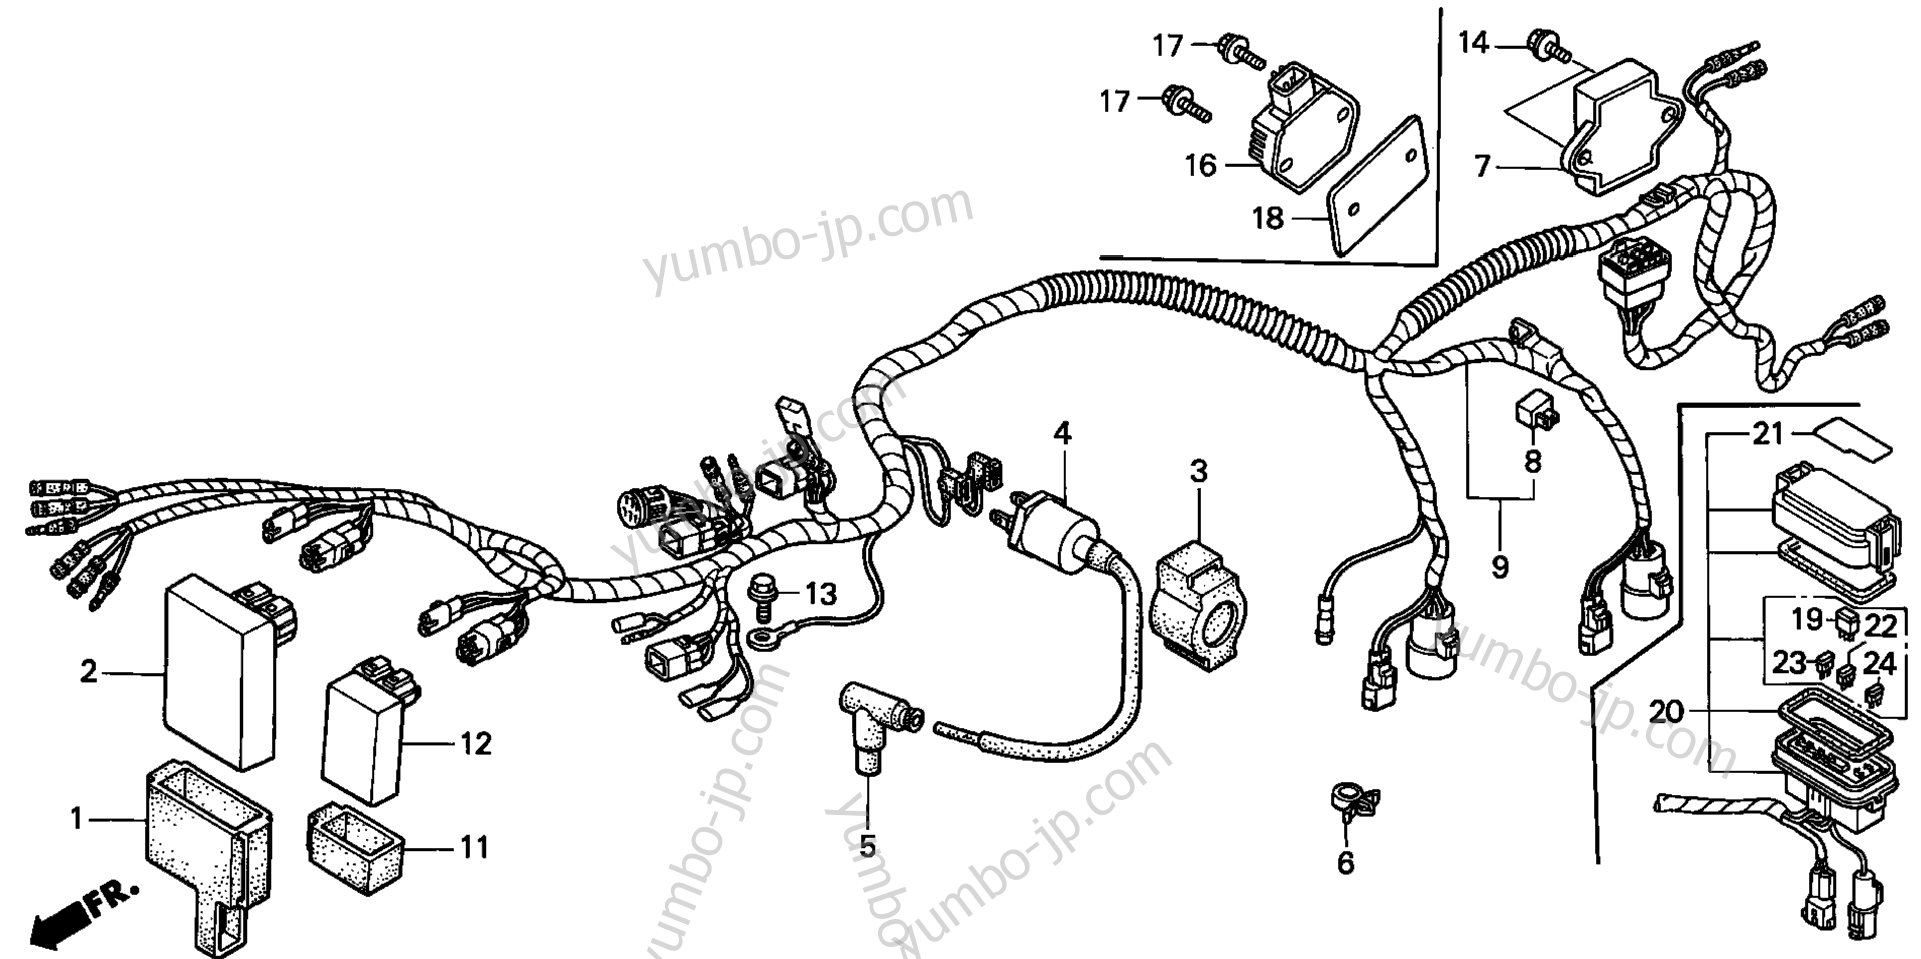 WIRE HARNESS for ATVs HONDA TRX400FW A 2002 year